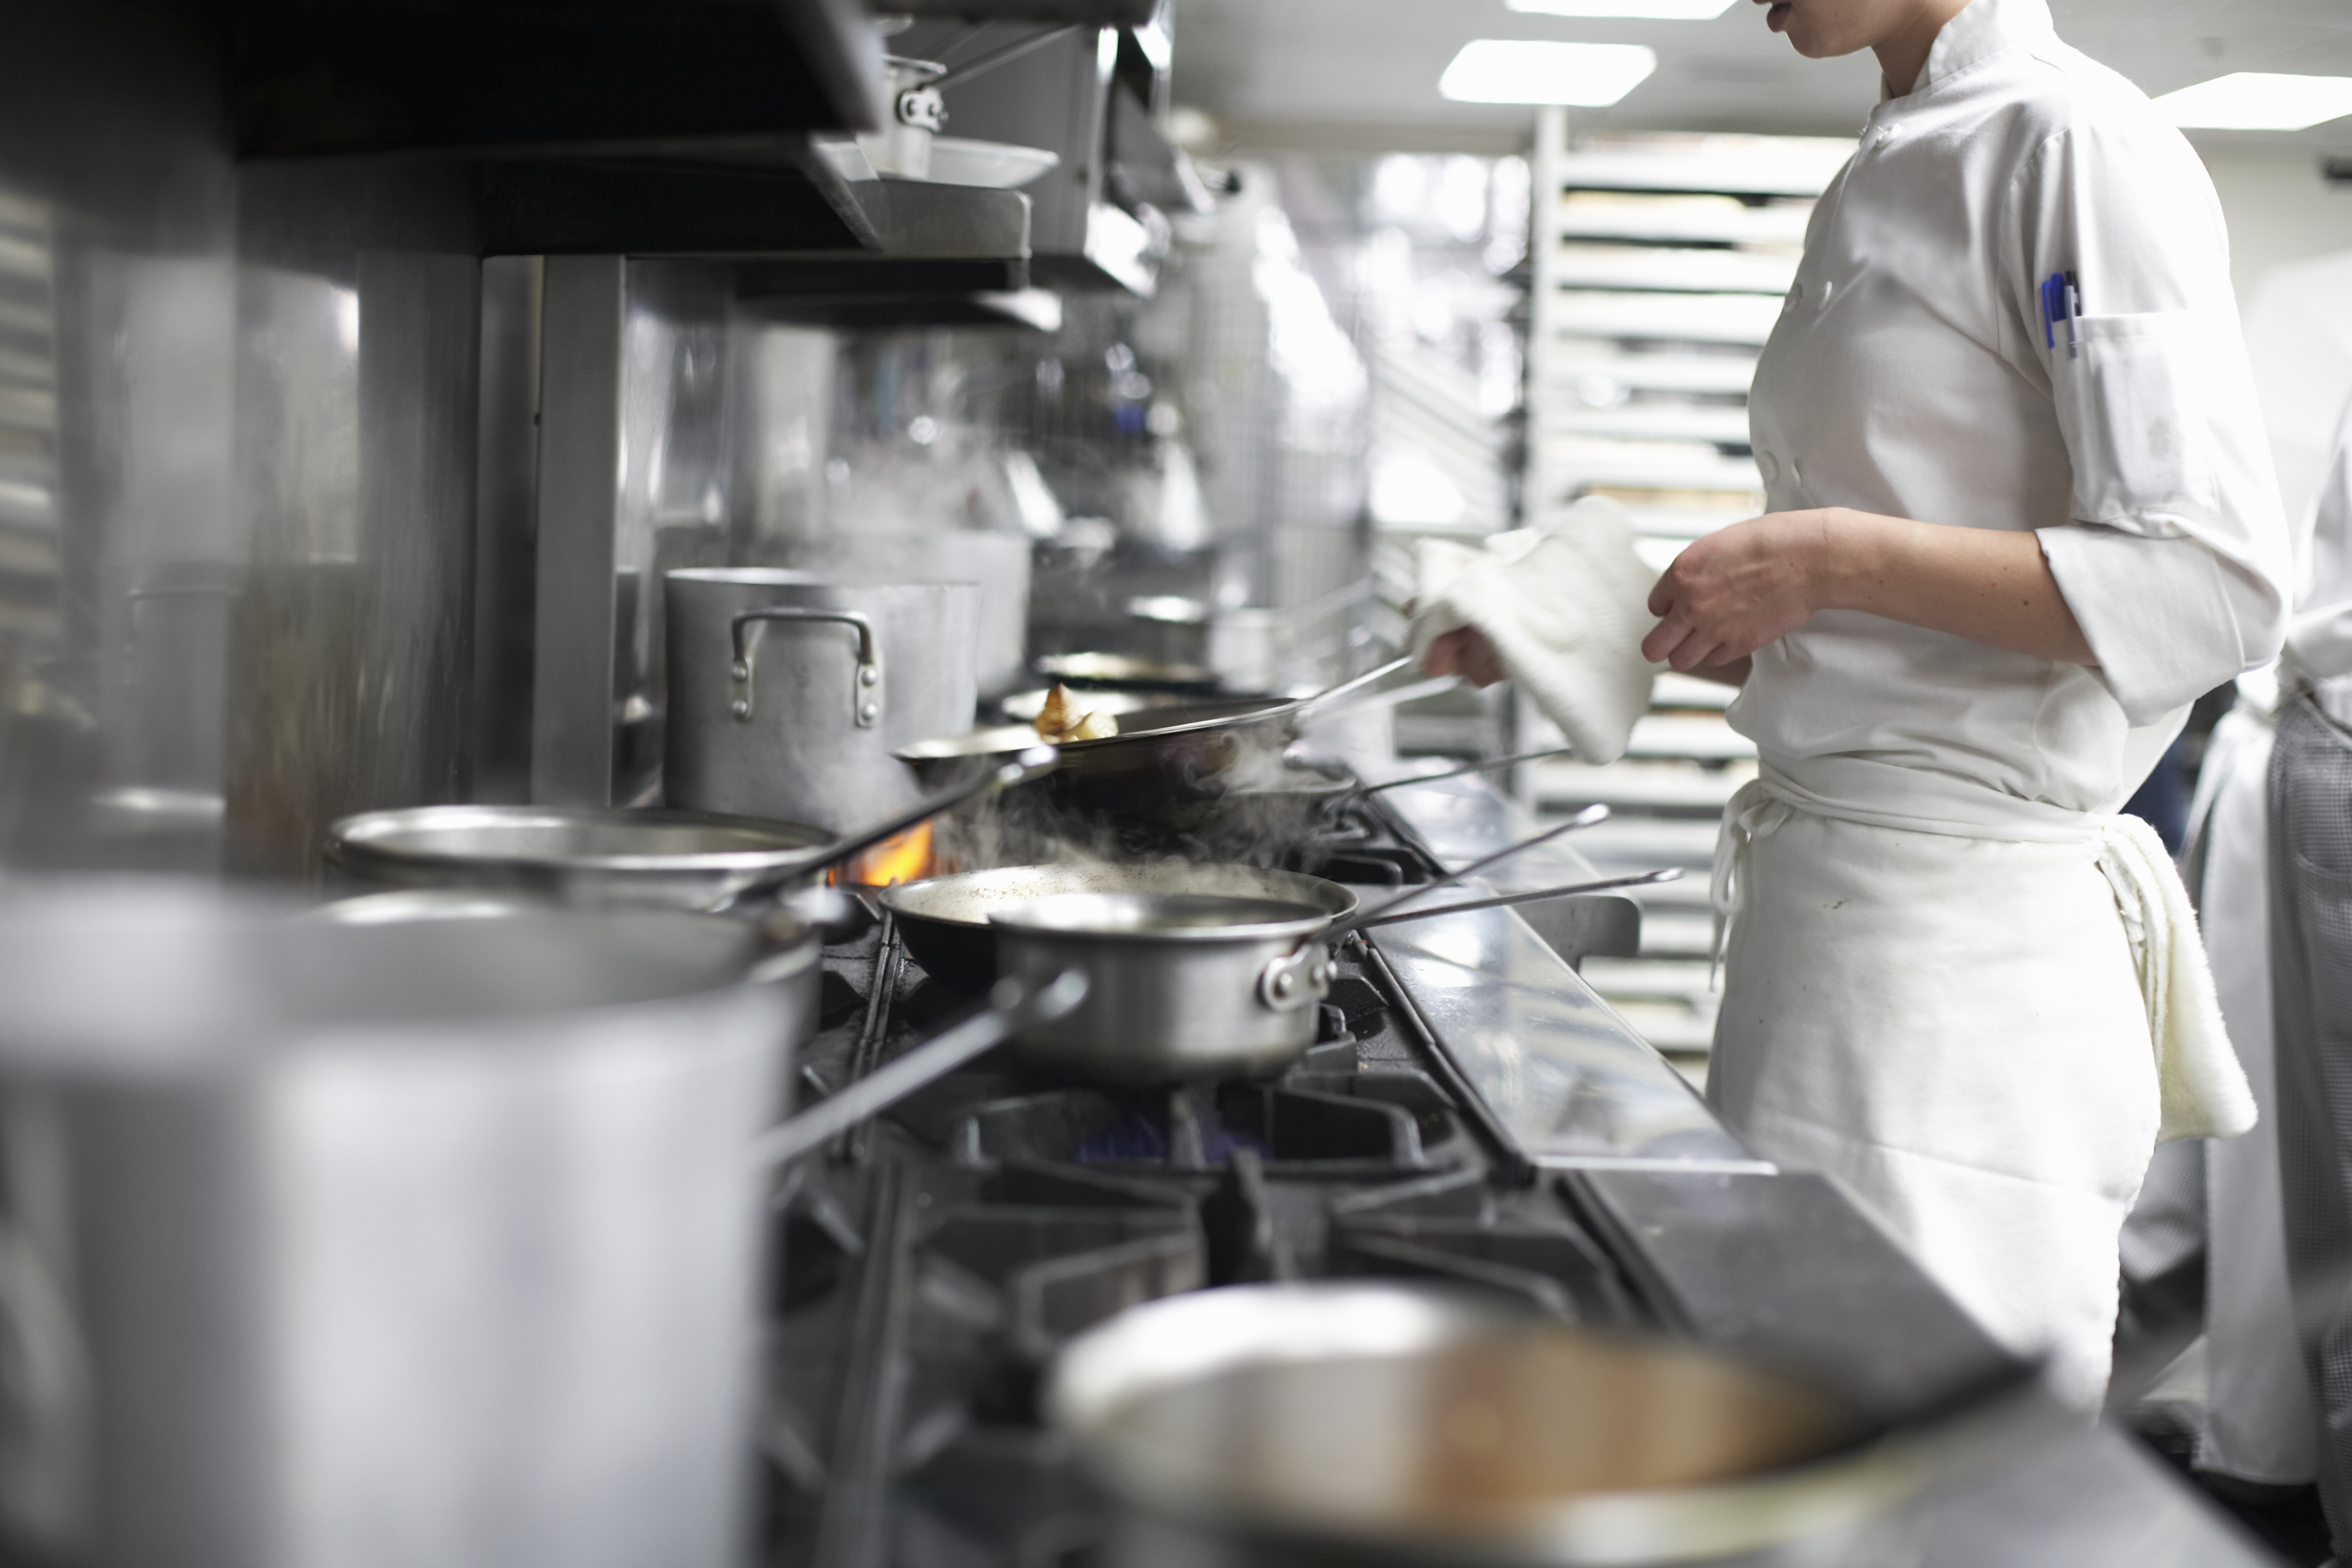 A female chef, dressed in white and visible from the chin down, stands over the stove in a restaurant kitchen